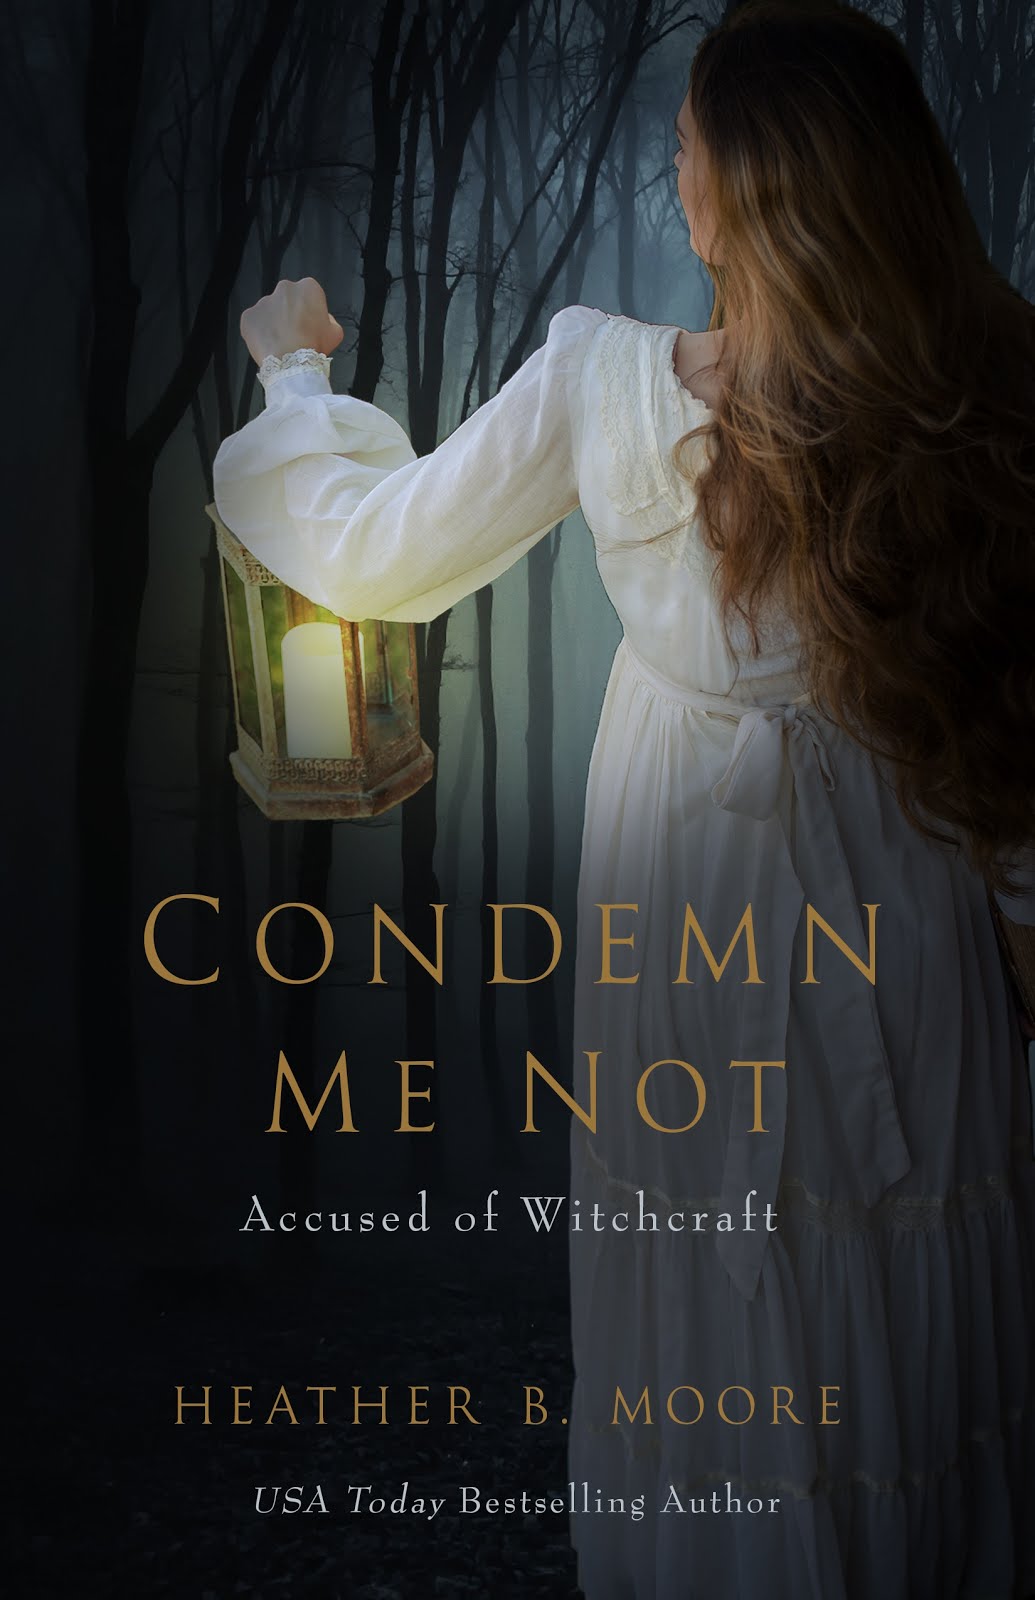 Condemn Me Not: Accused of Witchcraft